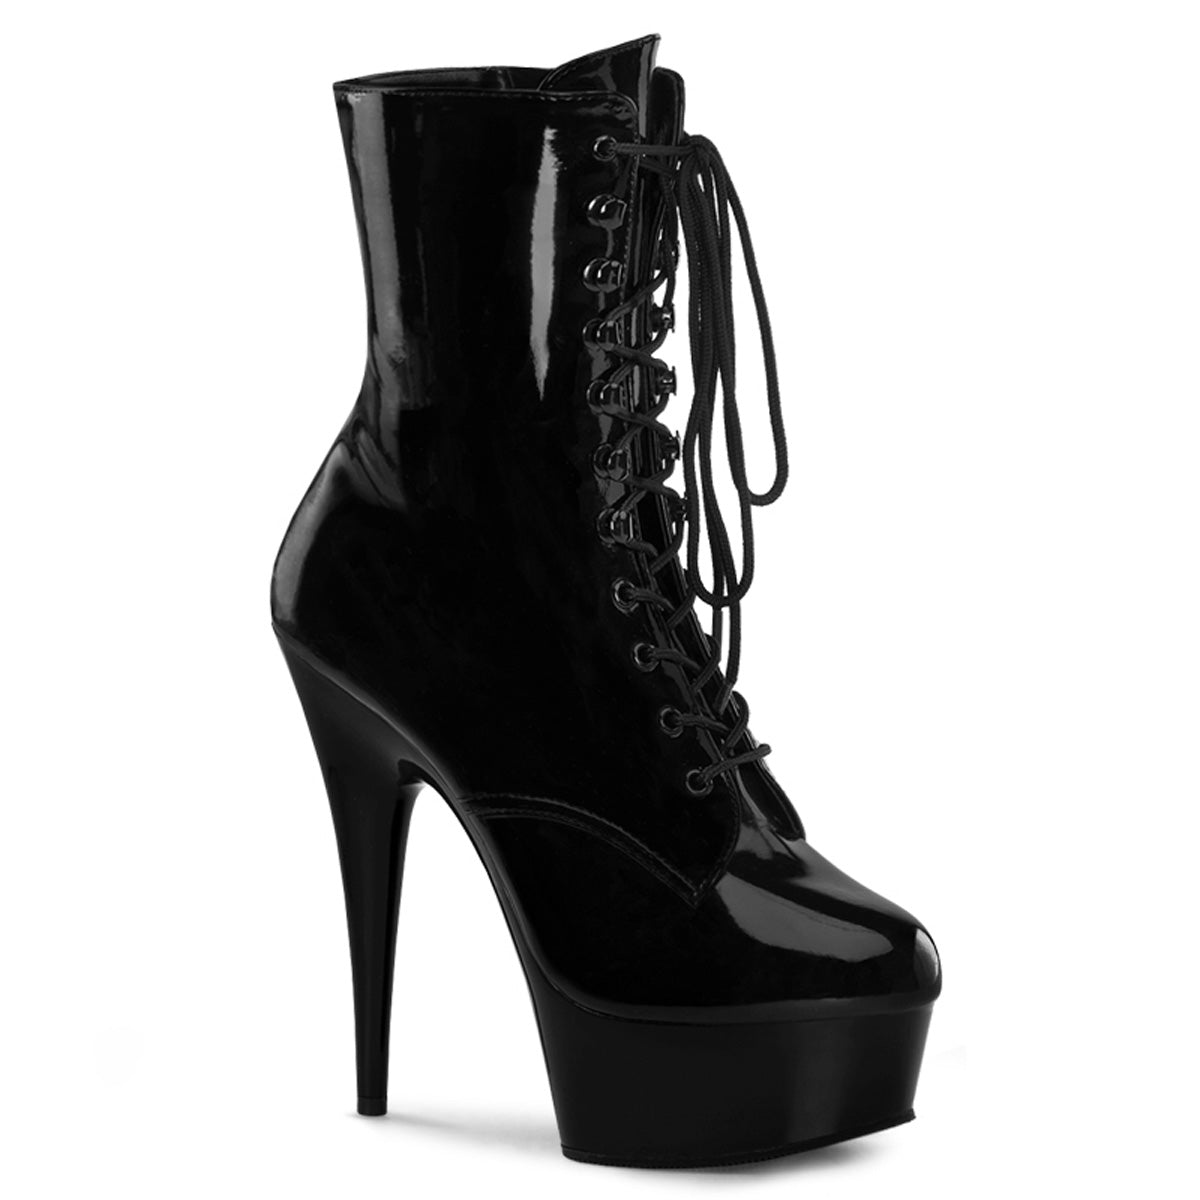 DELIGHT-1020 Black Ankle Boots